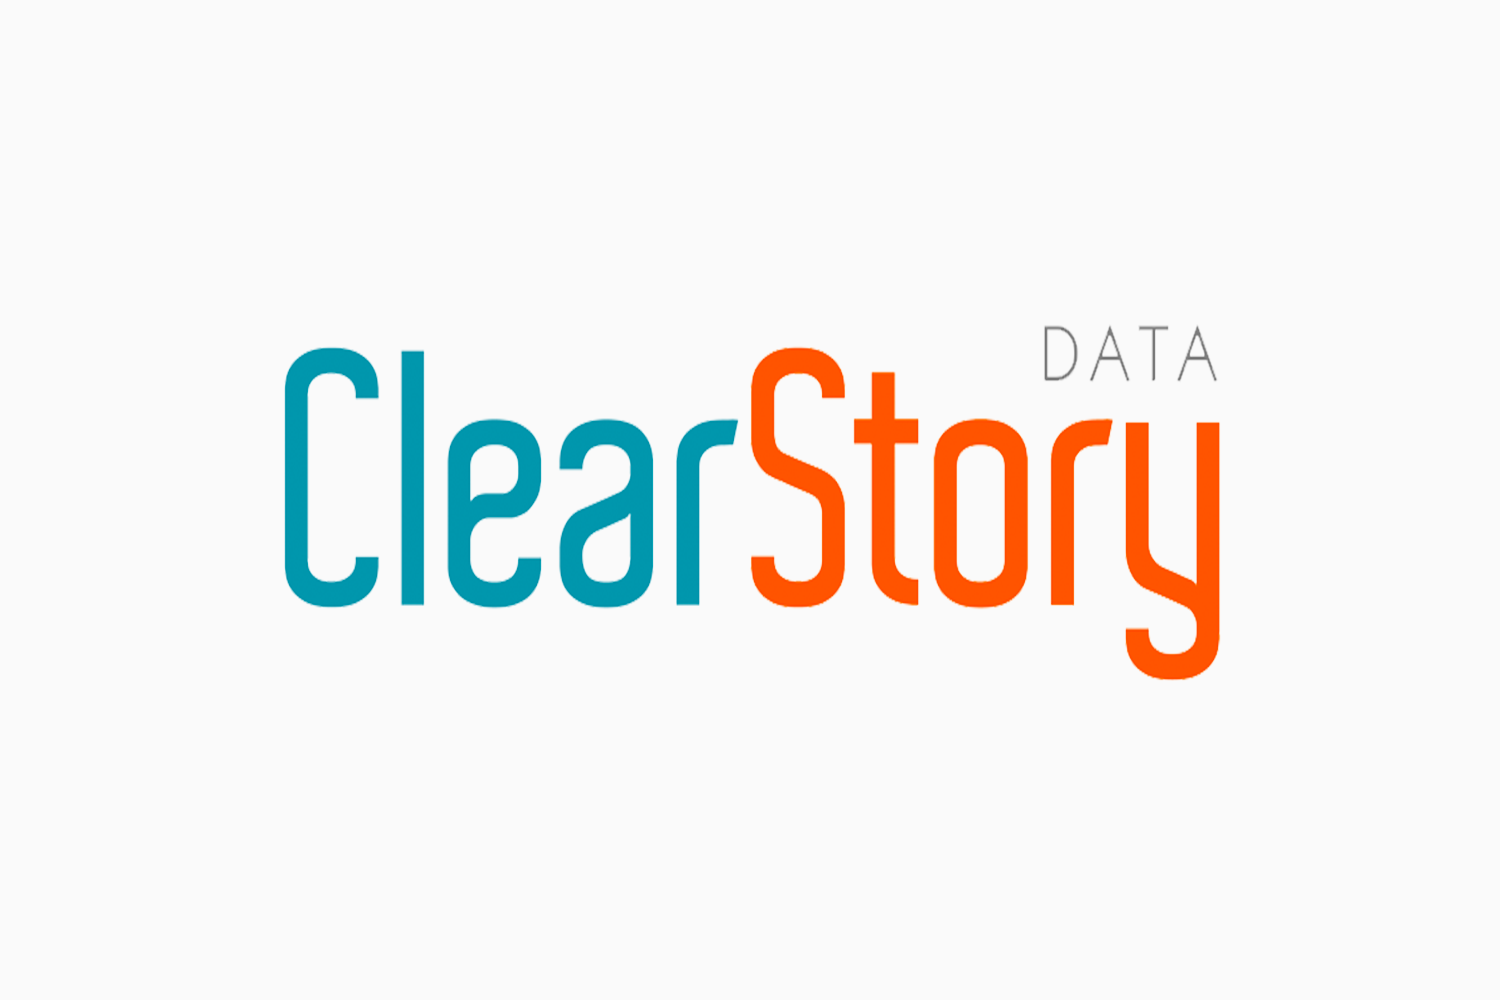 Alteryx Acquires ClearStory Data to Accelerate Innovation in Data Science and Analytics